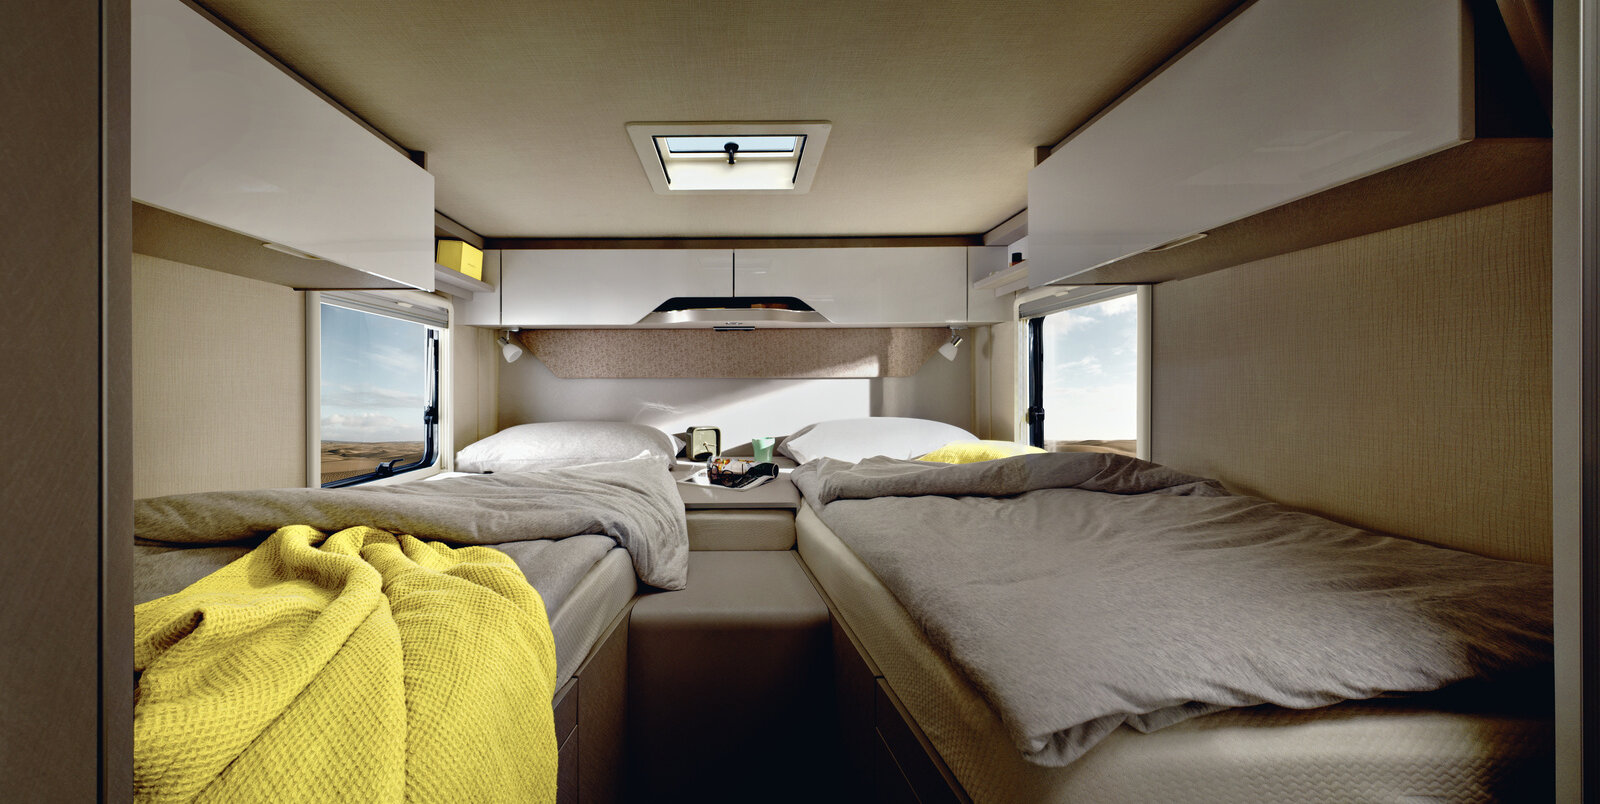 Sleeping area in the HYMER T-Class S 680: two made-up lengthways single beds, yellow bath towel, central access, overhead storage cupboards